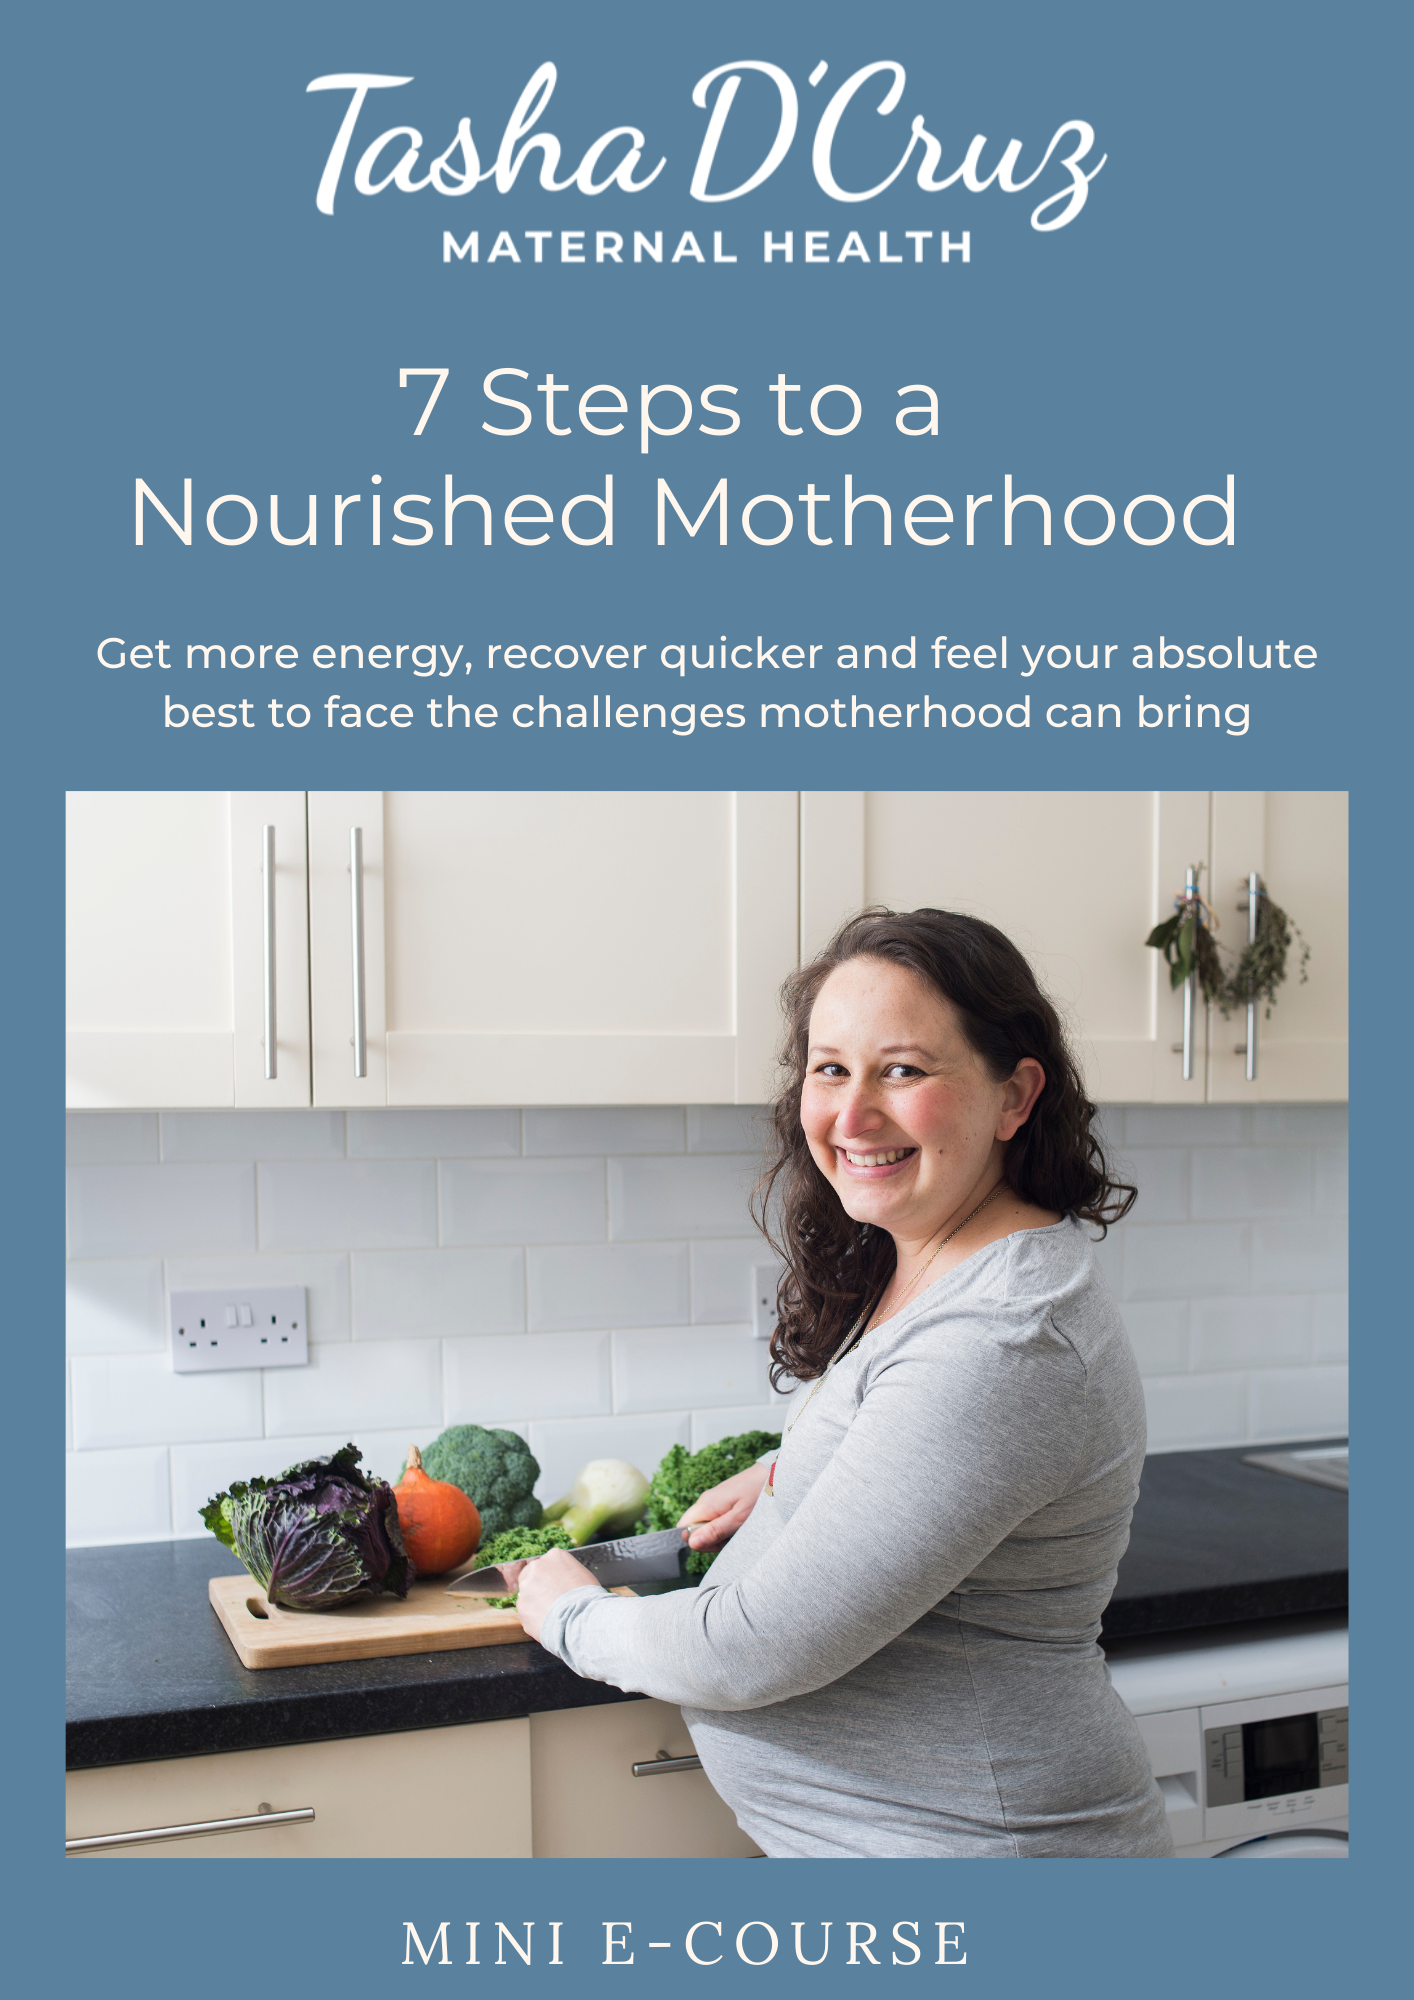 7 Steps to a Nourished Motherhood cover.png